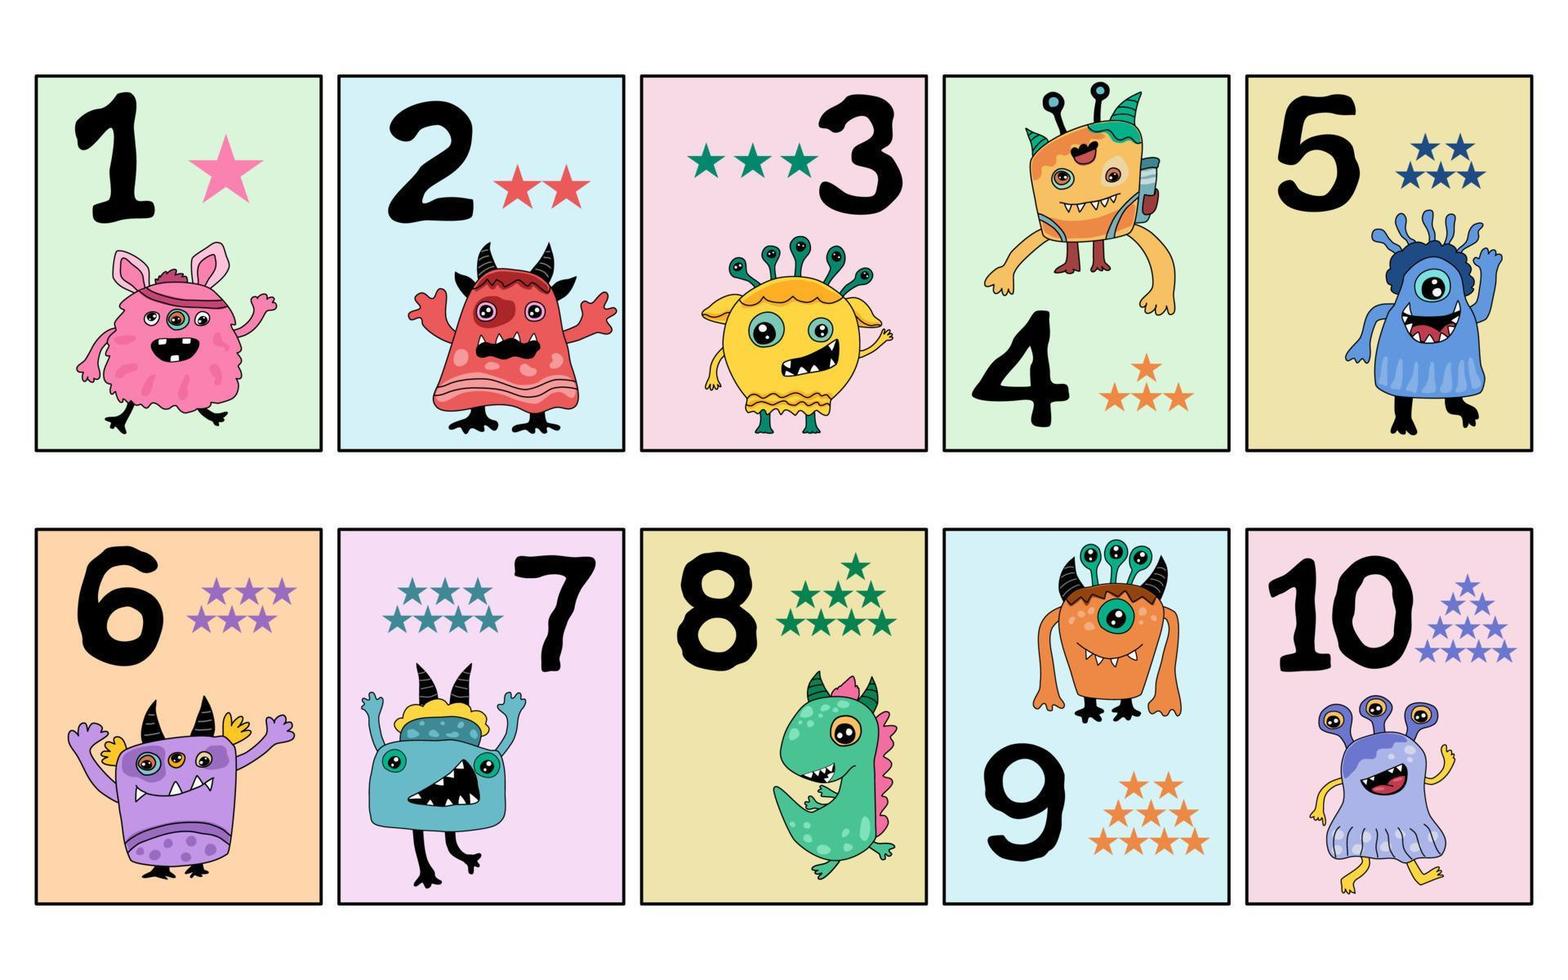 Cute monster patterns number flashcards in doodle style vector